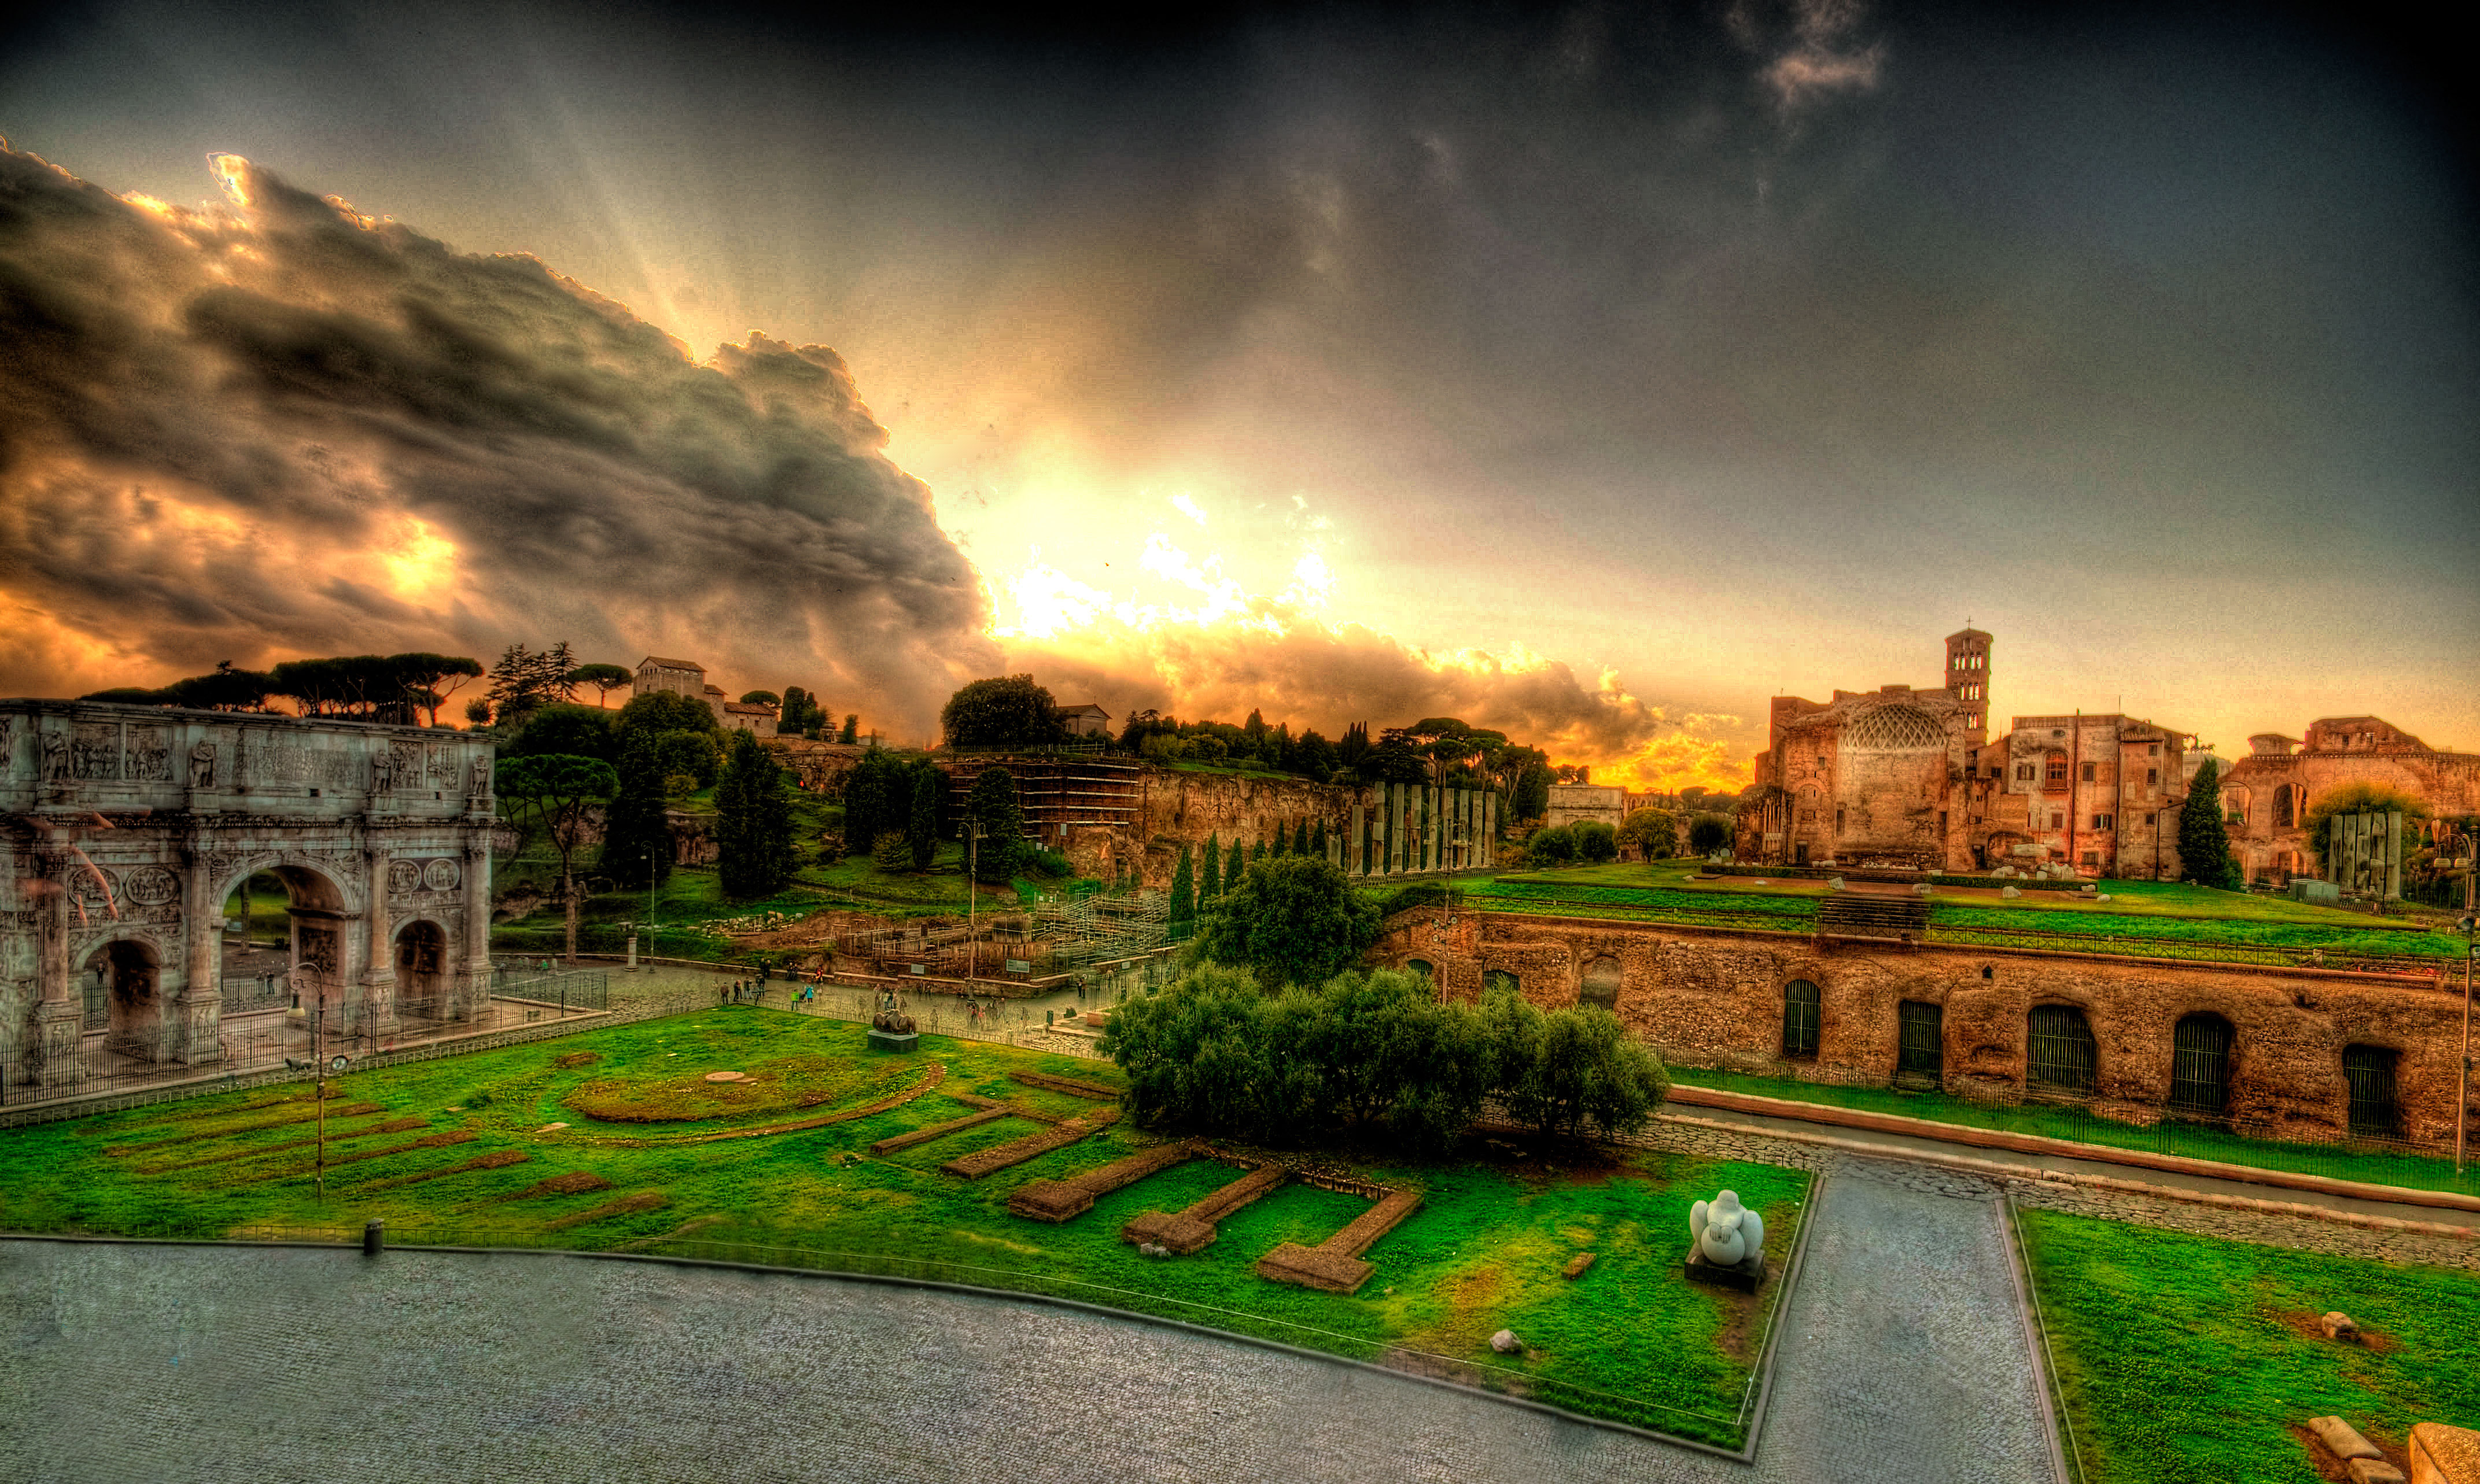 http://fc00.deviantart.net/fs50/f/2009/308/f/9/View_from_Colosseum_by_andsol1.jpg